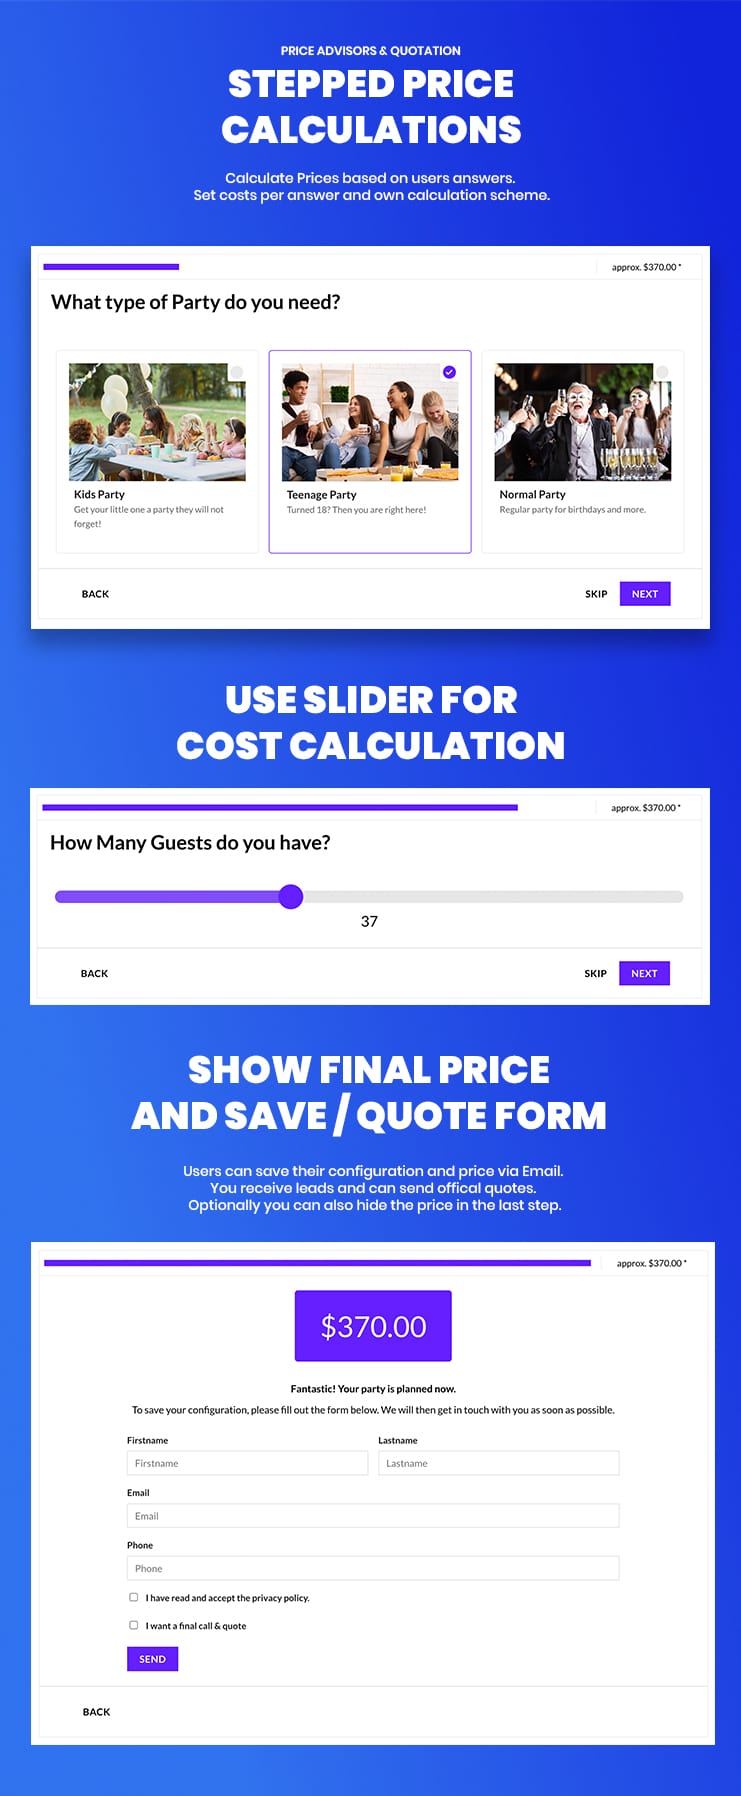 Price calculations